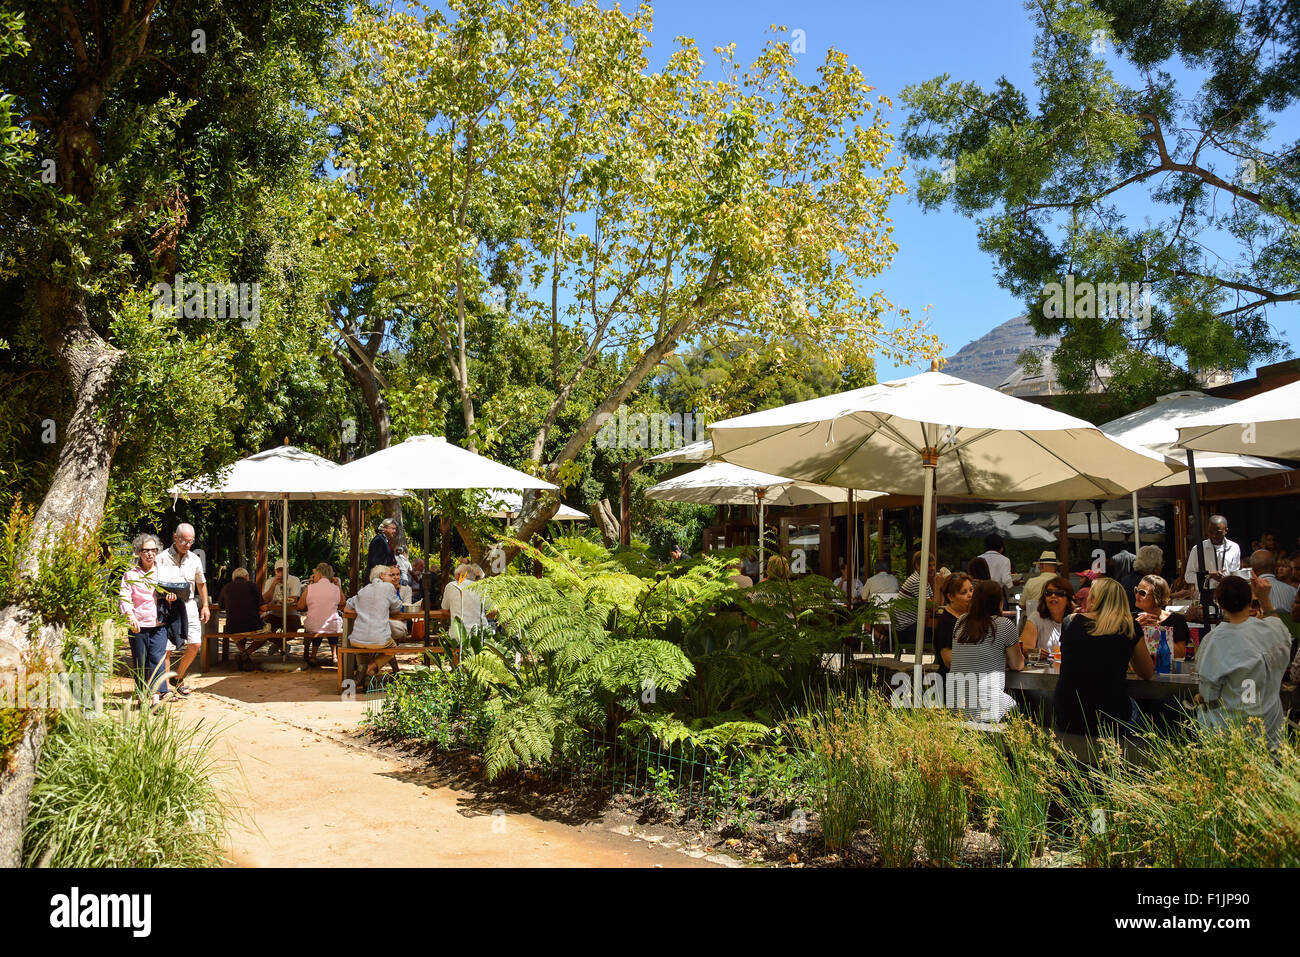 The Restaurant in The Public Garden, Cape Town, Western Cape Province, Republic of South Africa Stock Photo